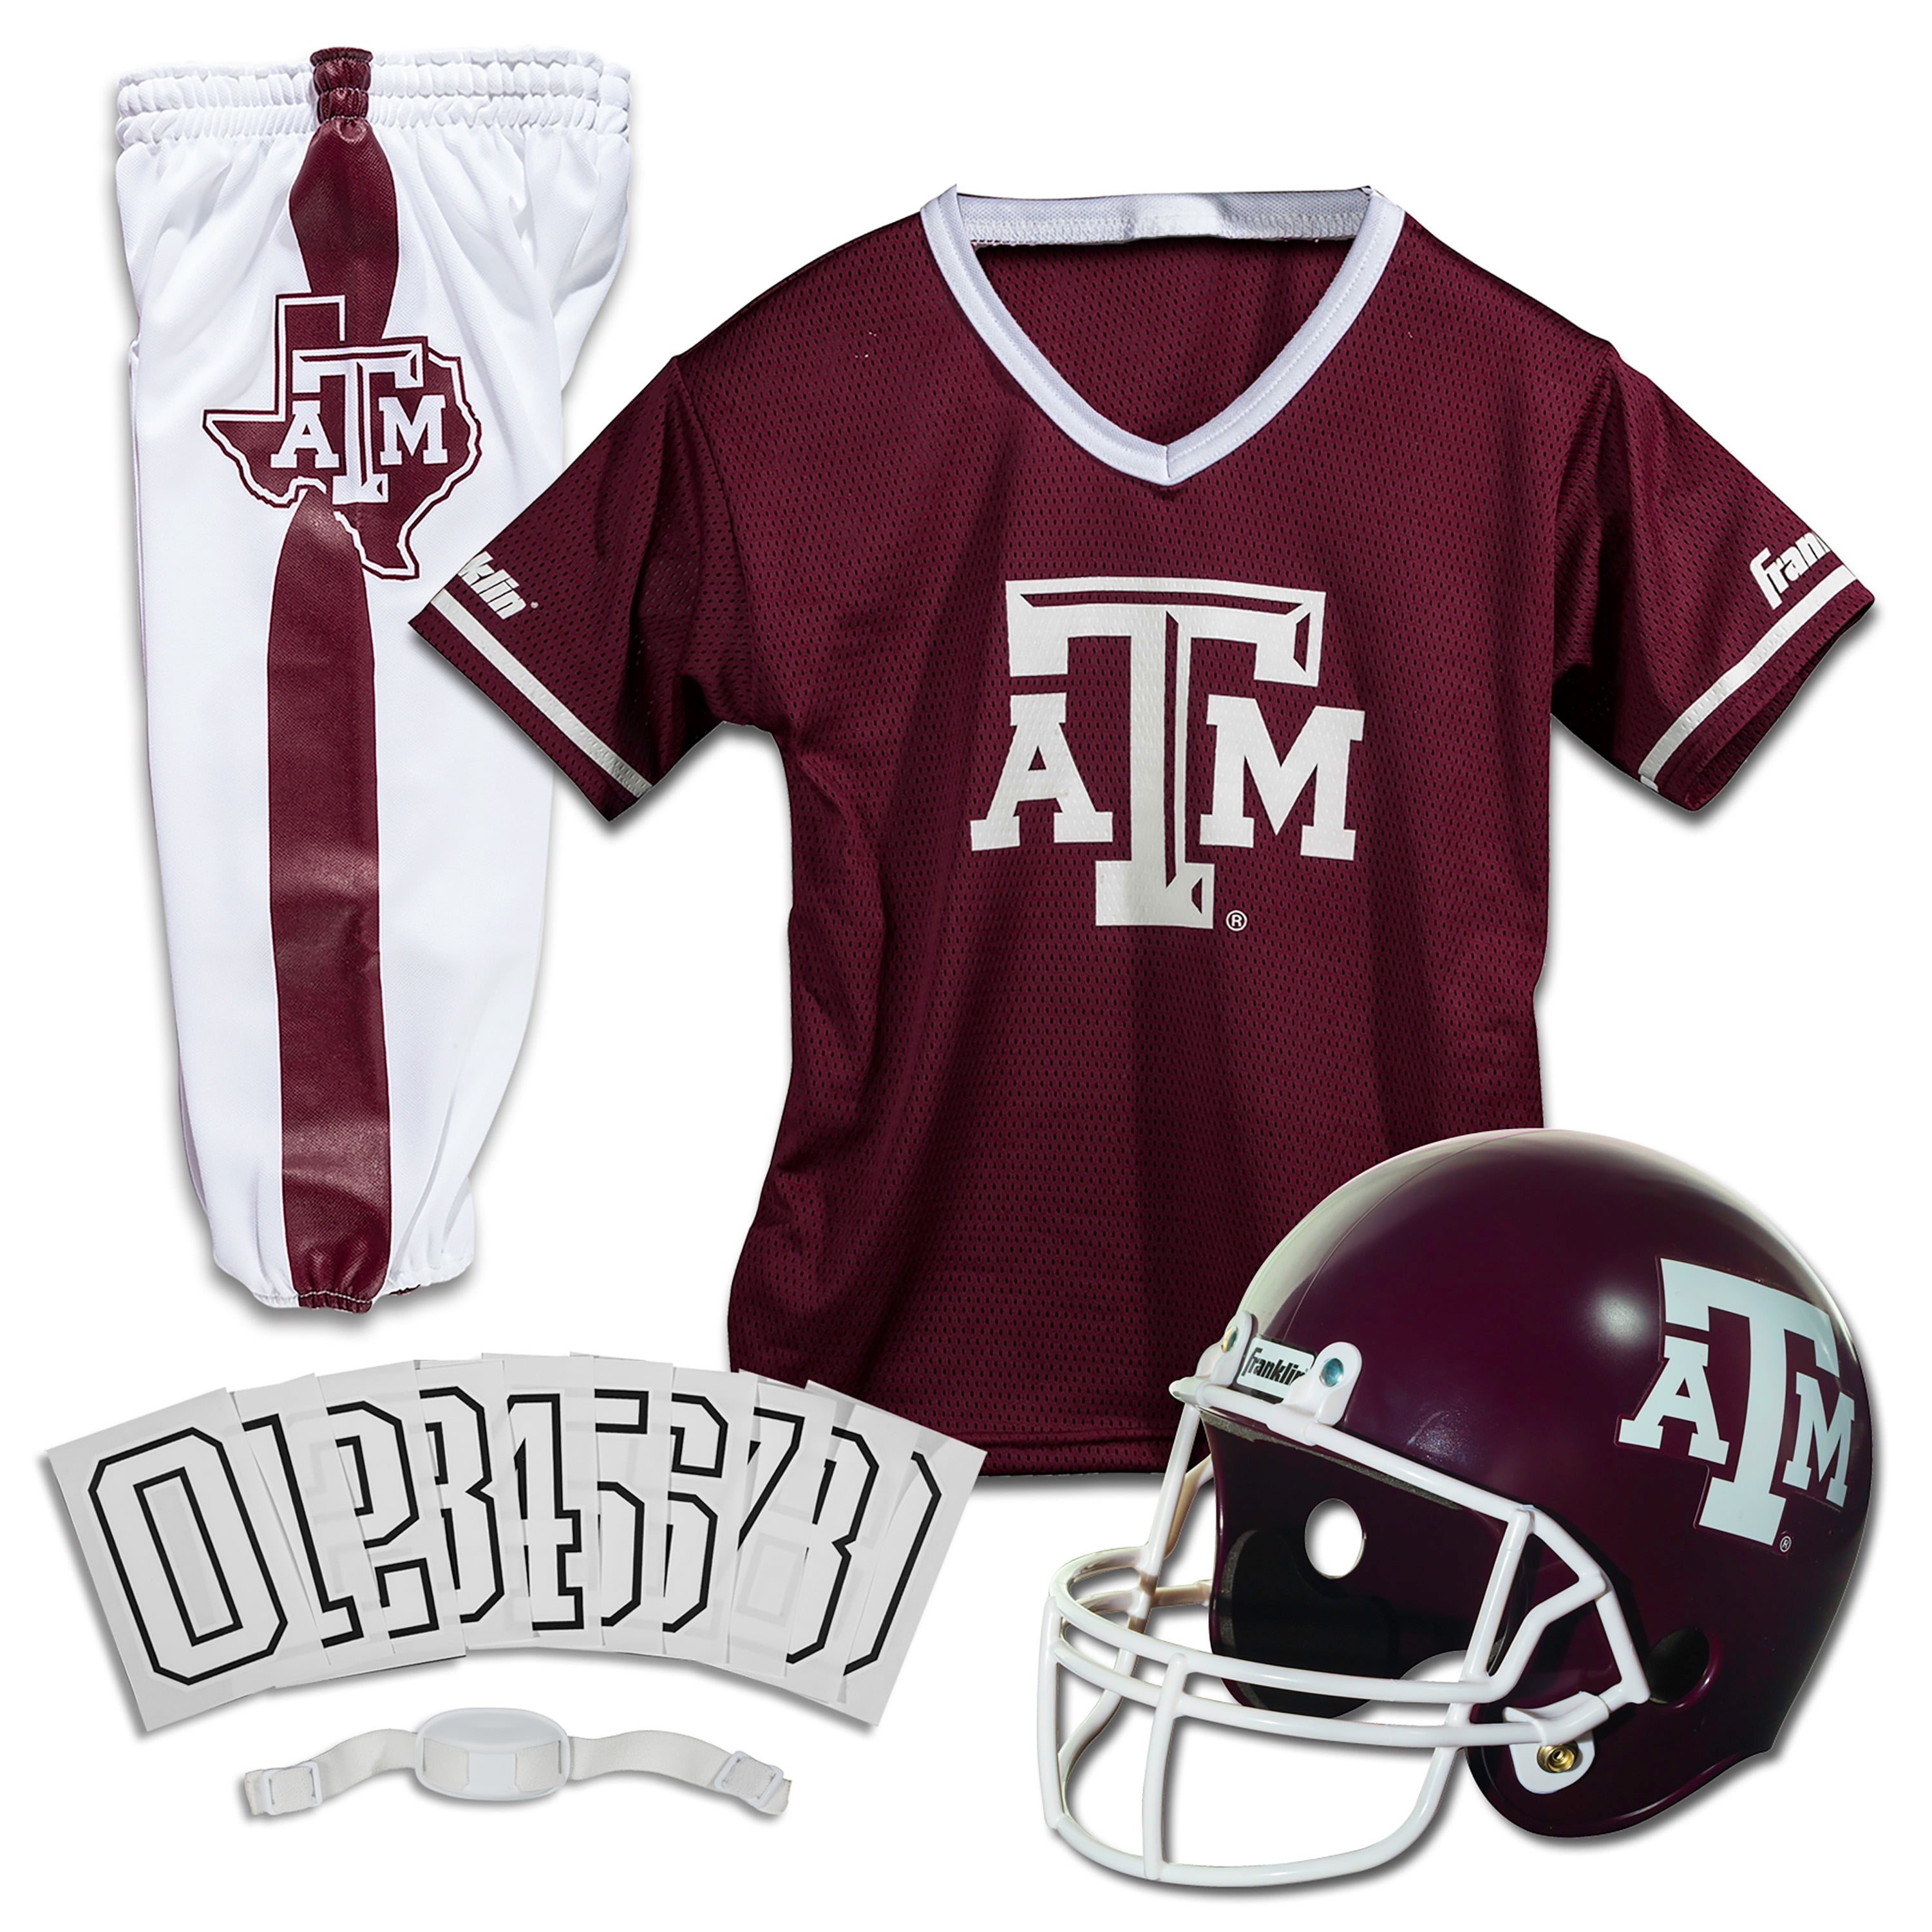 texas a&m youth football jersey